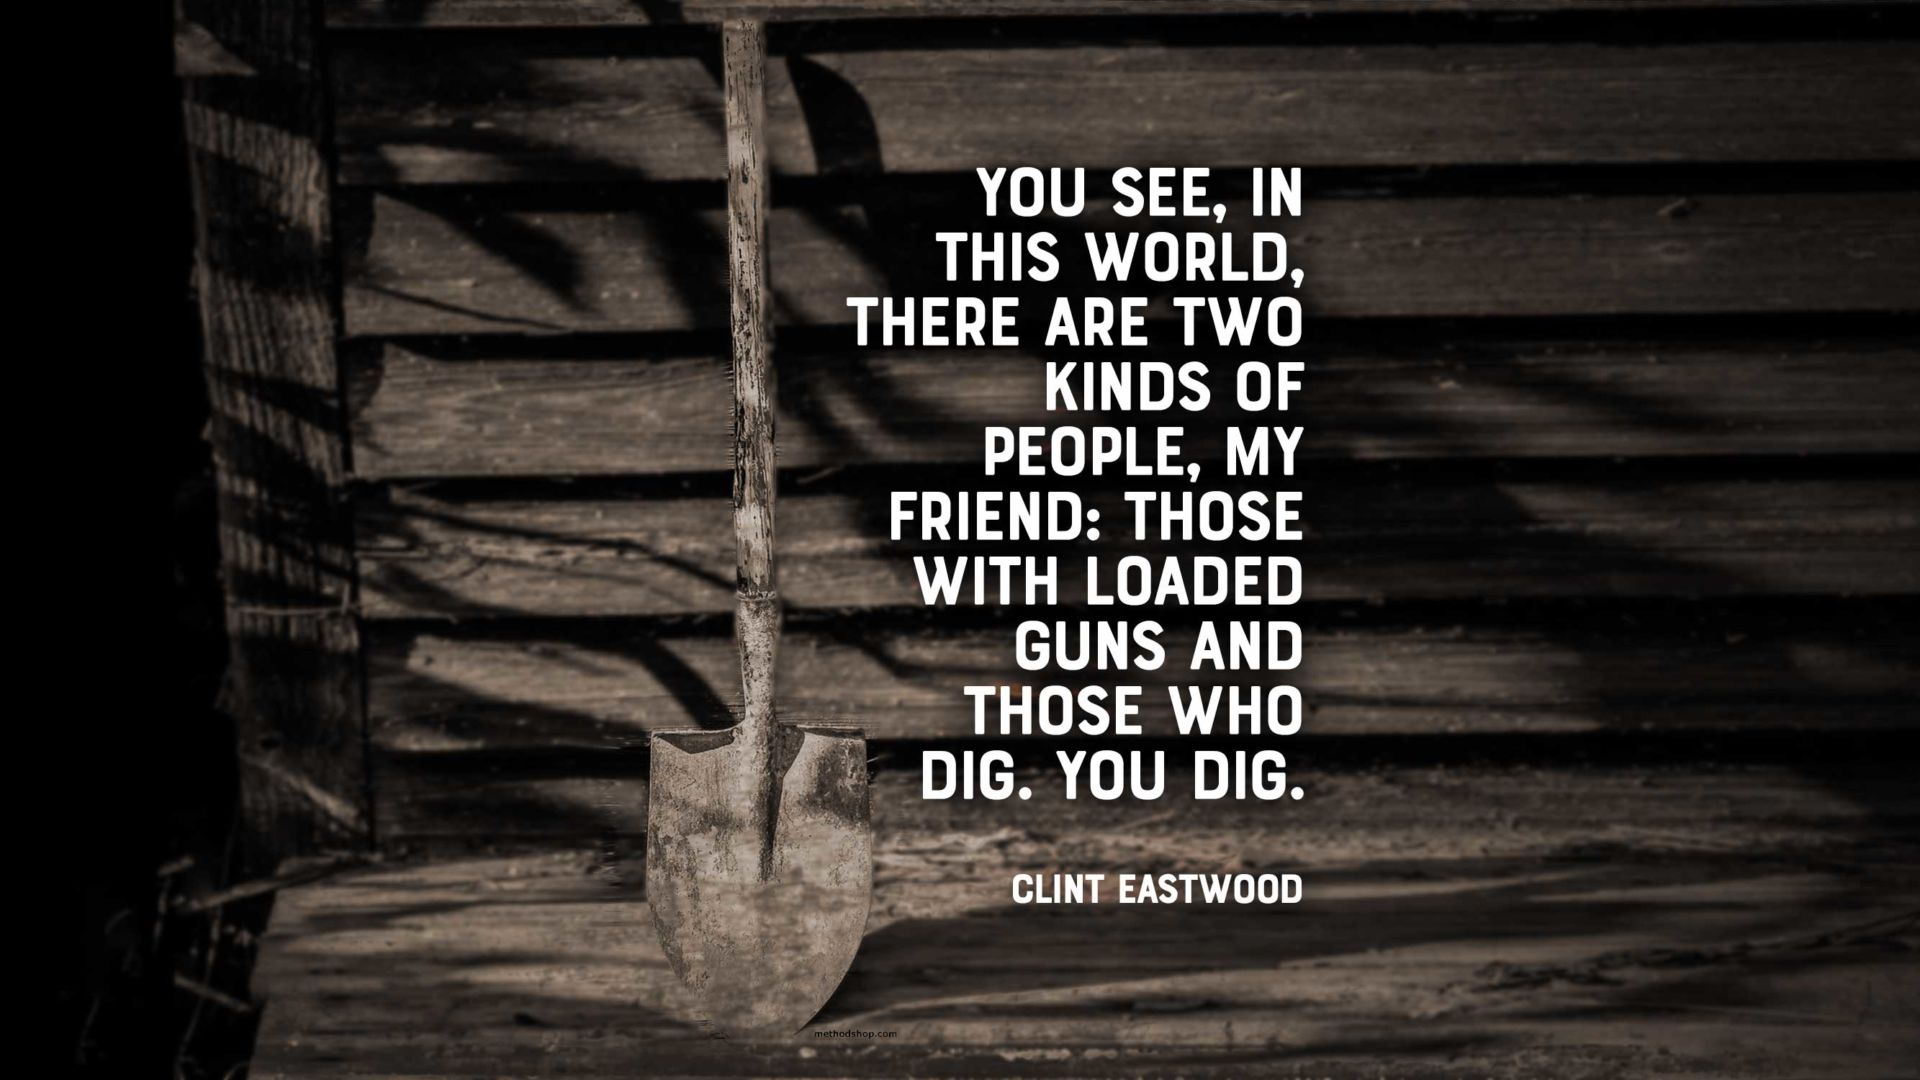 &Quot;You See, In This World, There Are Two Kinds Of People, My Friend: Those With Loaded Guns And Those Who Dig. You Dig.&Quot;